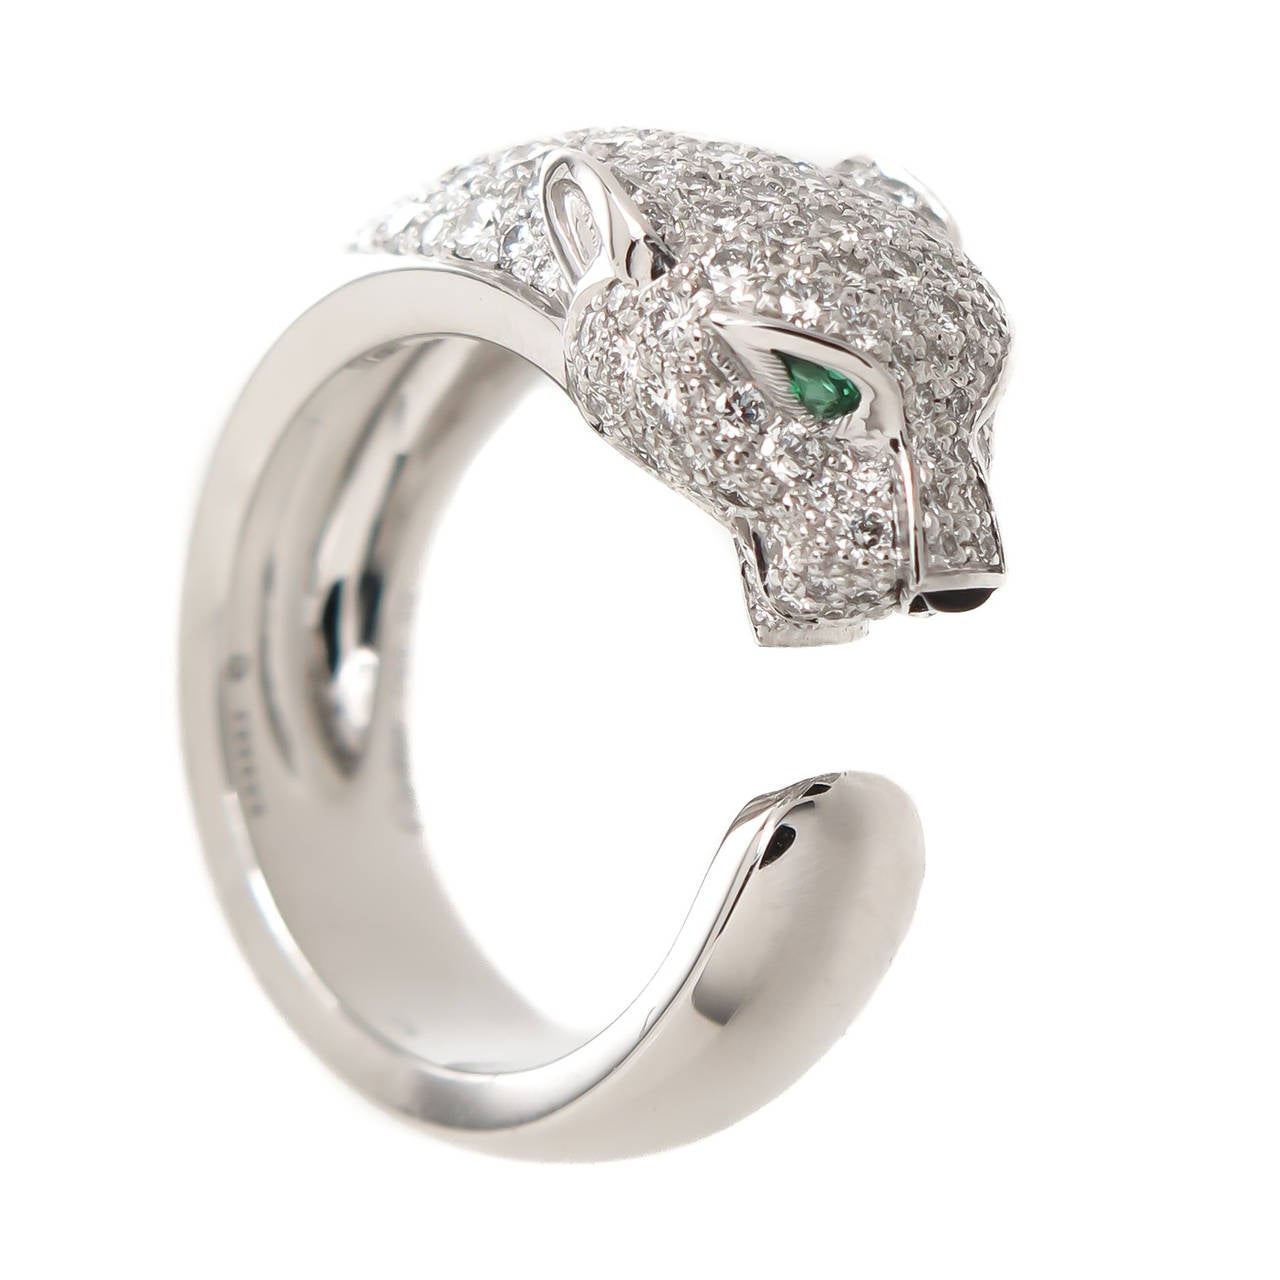 Circa 2012 Cartier 18K White Gold and Diamond ring from the Cartier De Panthere Collection. Set with 1.50 Carats Fine White, Round Brilliant cut Diamonds and further accented with Emerald Eyes and an Onyx Nose. Finger size = 6  ( 52  European ) 